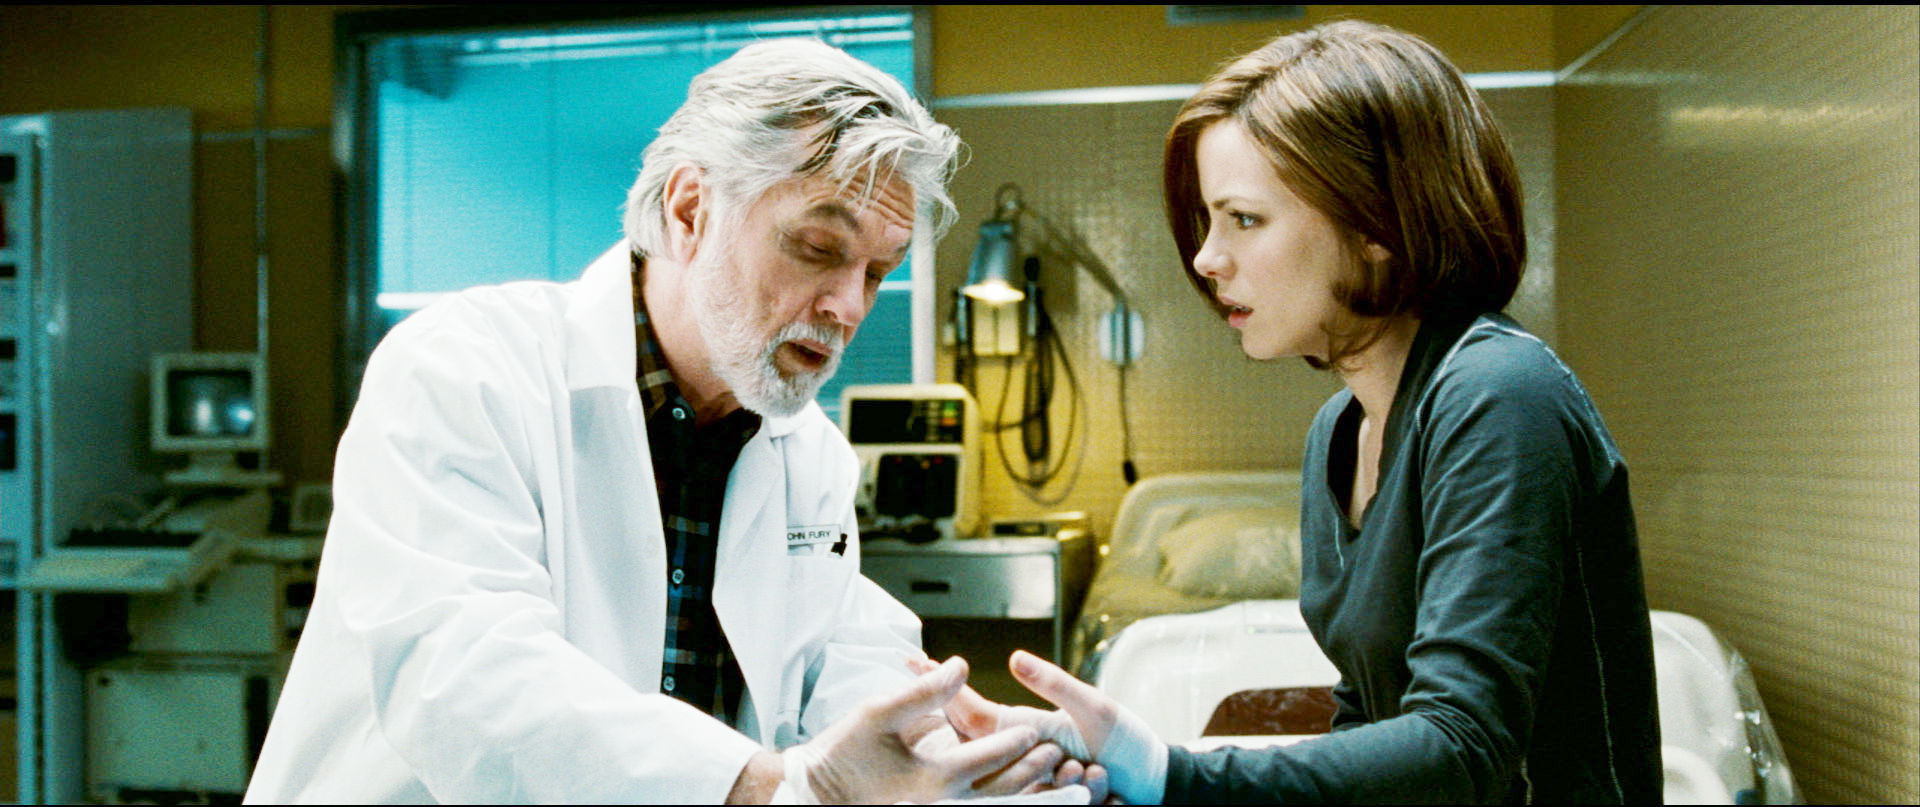 Tom Skerritt and Kate Beckinsale (Carrie Stetko) in Warner Bros. Pictures' Whiteout (2009)